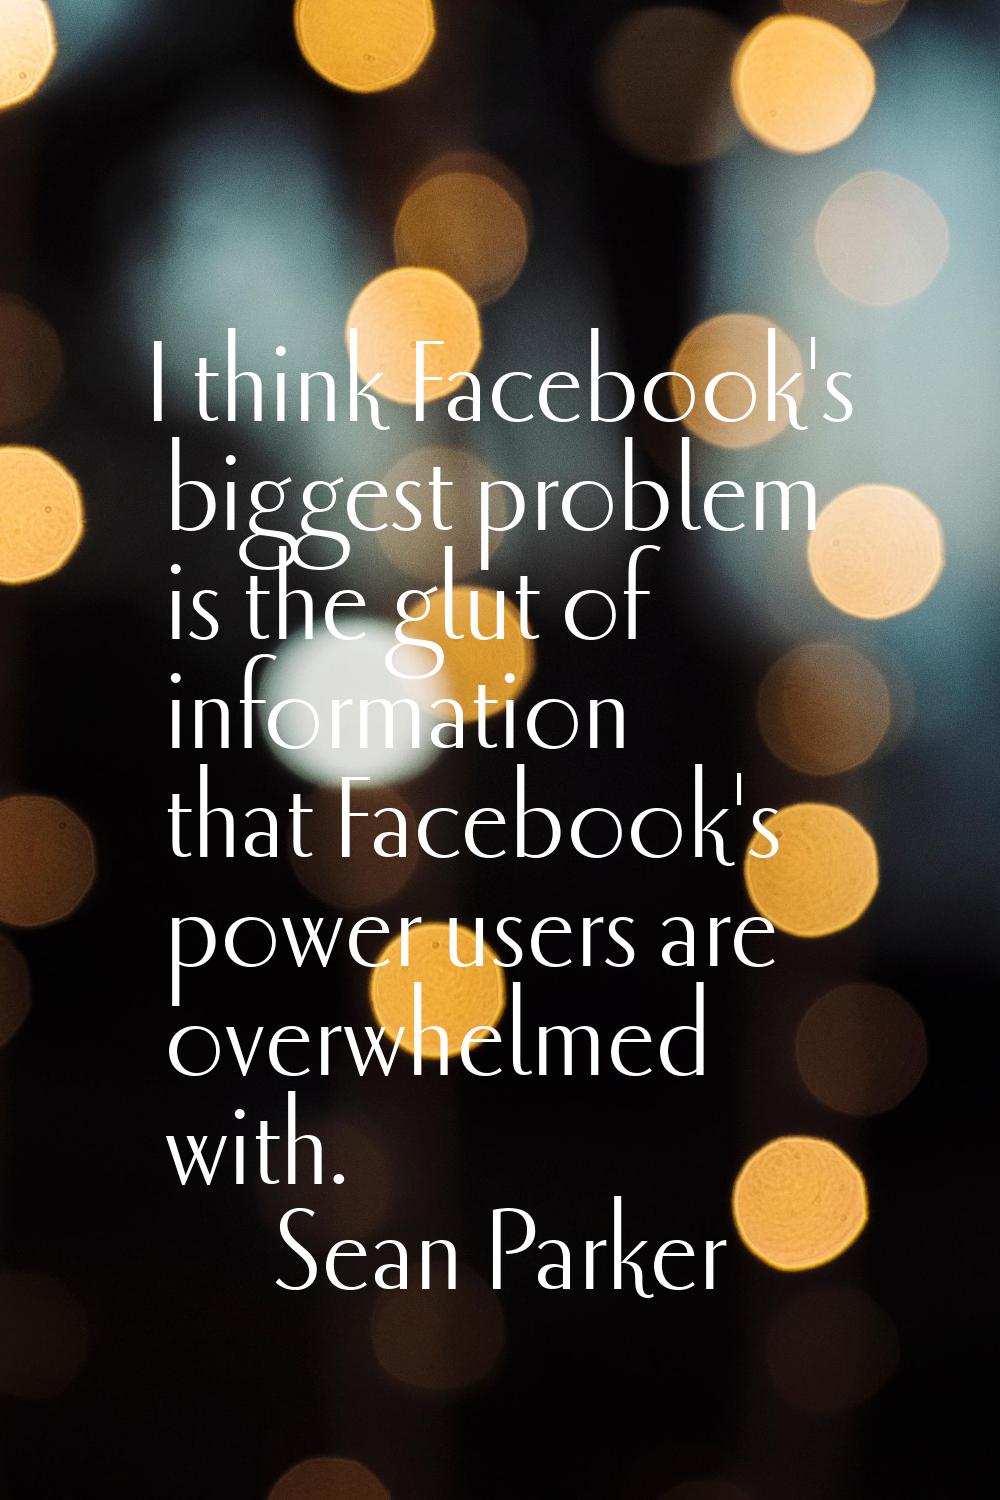 I think Facebook's biggest problem is the glut of information that Facebook's power users are overw